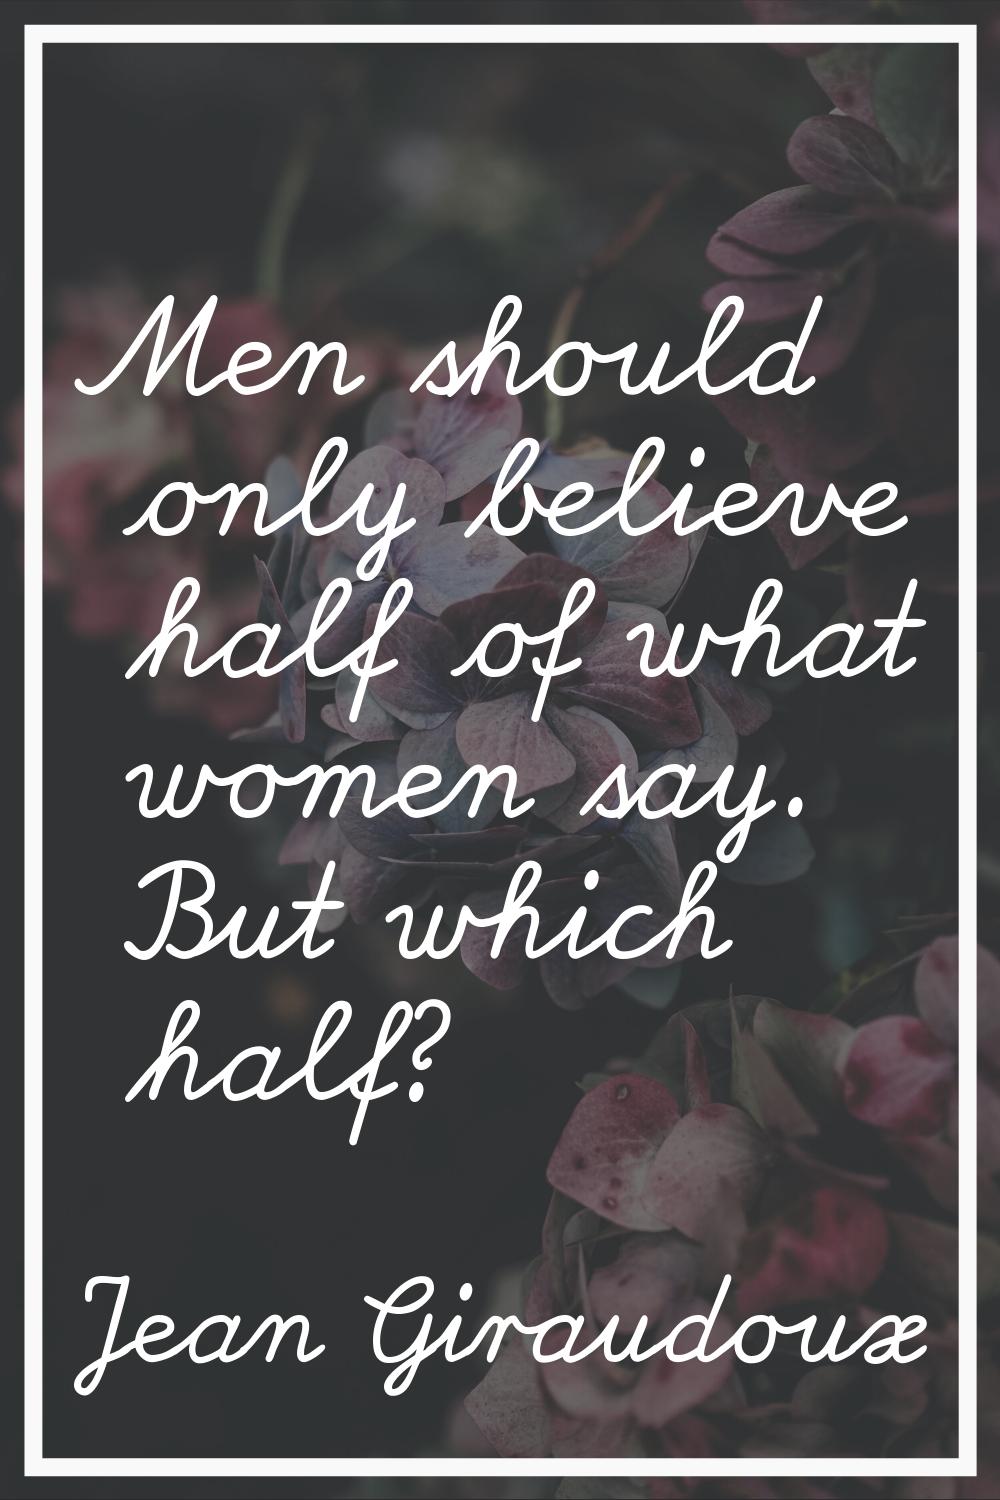 Men should only believe half of what women say. But which half?